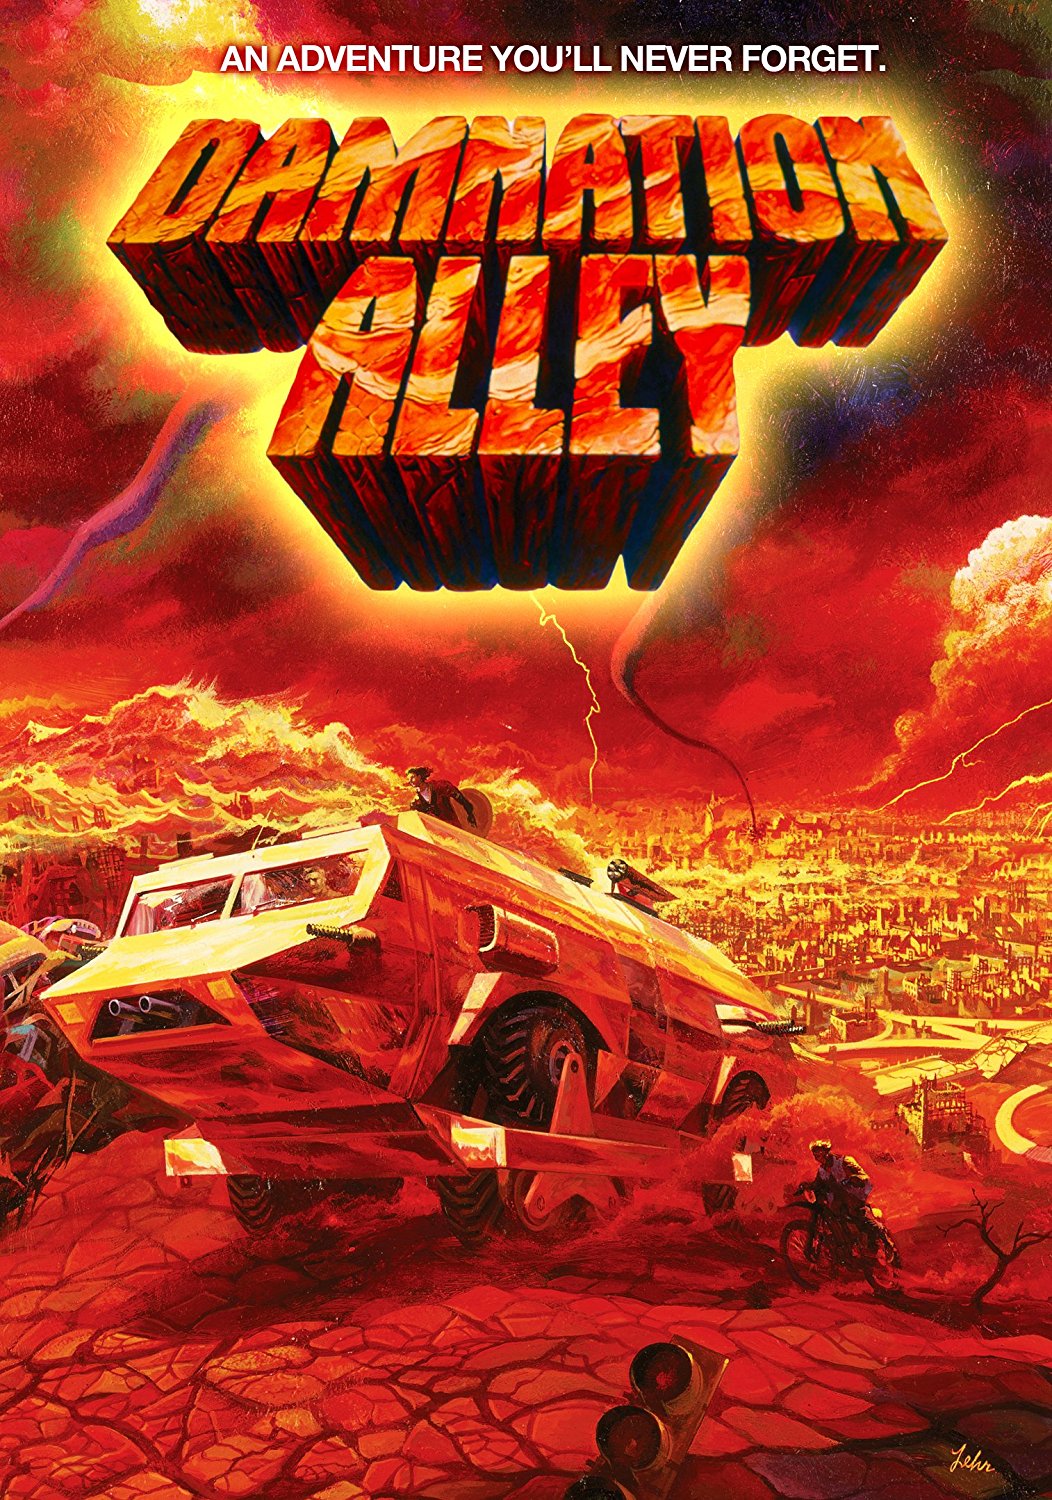 Damnation Alley (1977) starring George Peppard, Jan-Michael Vincent